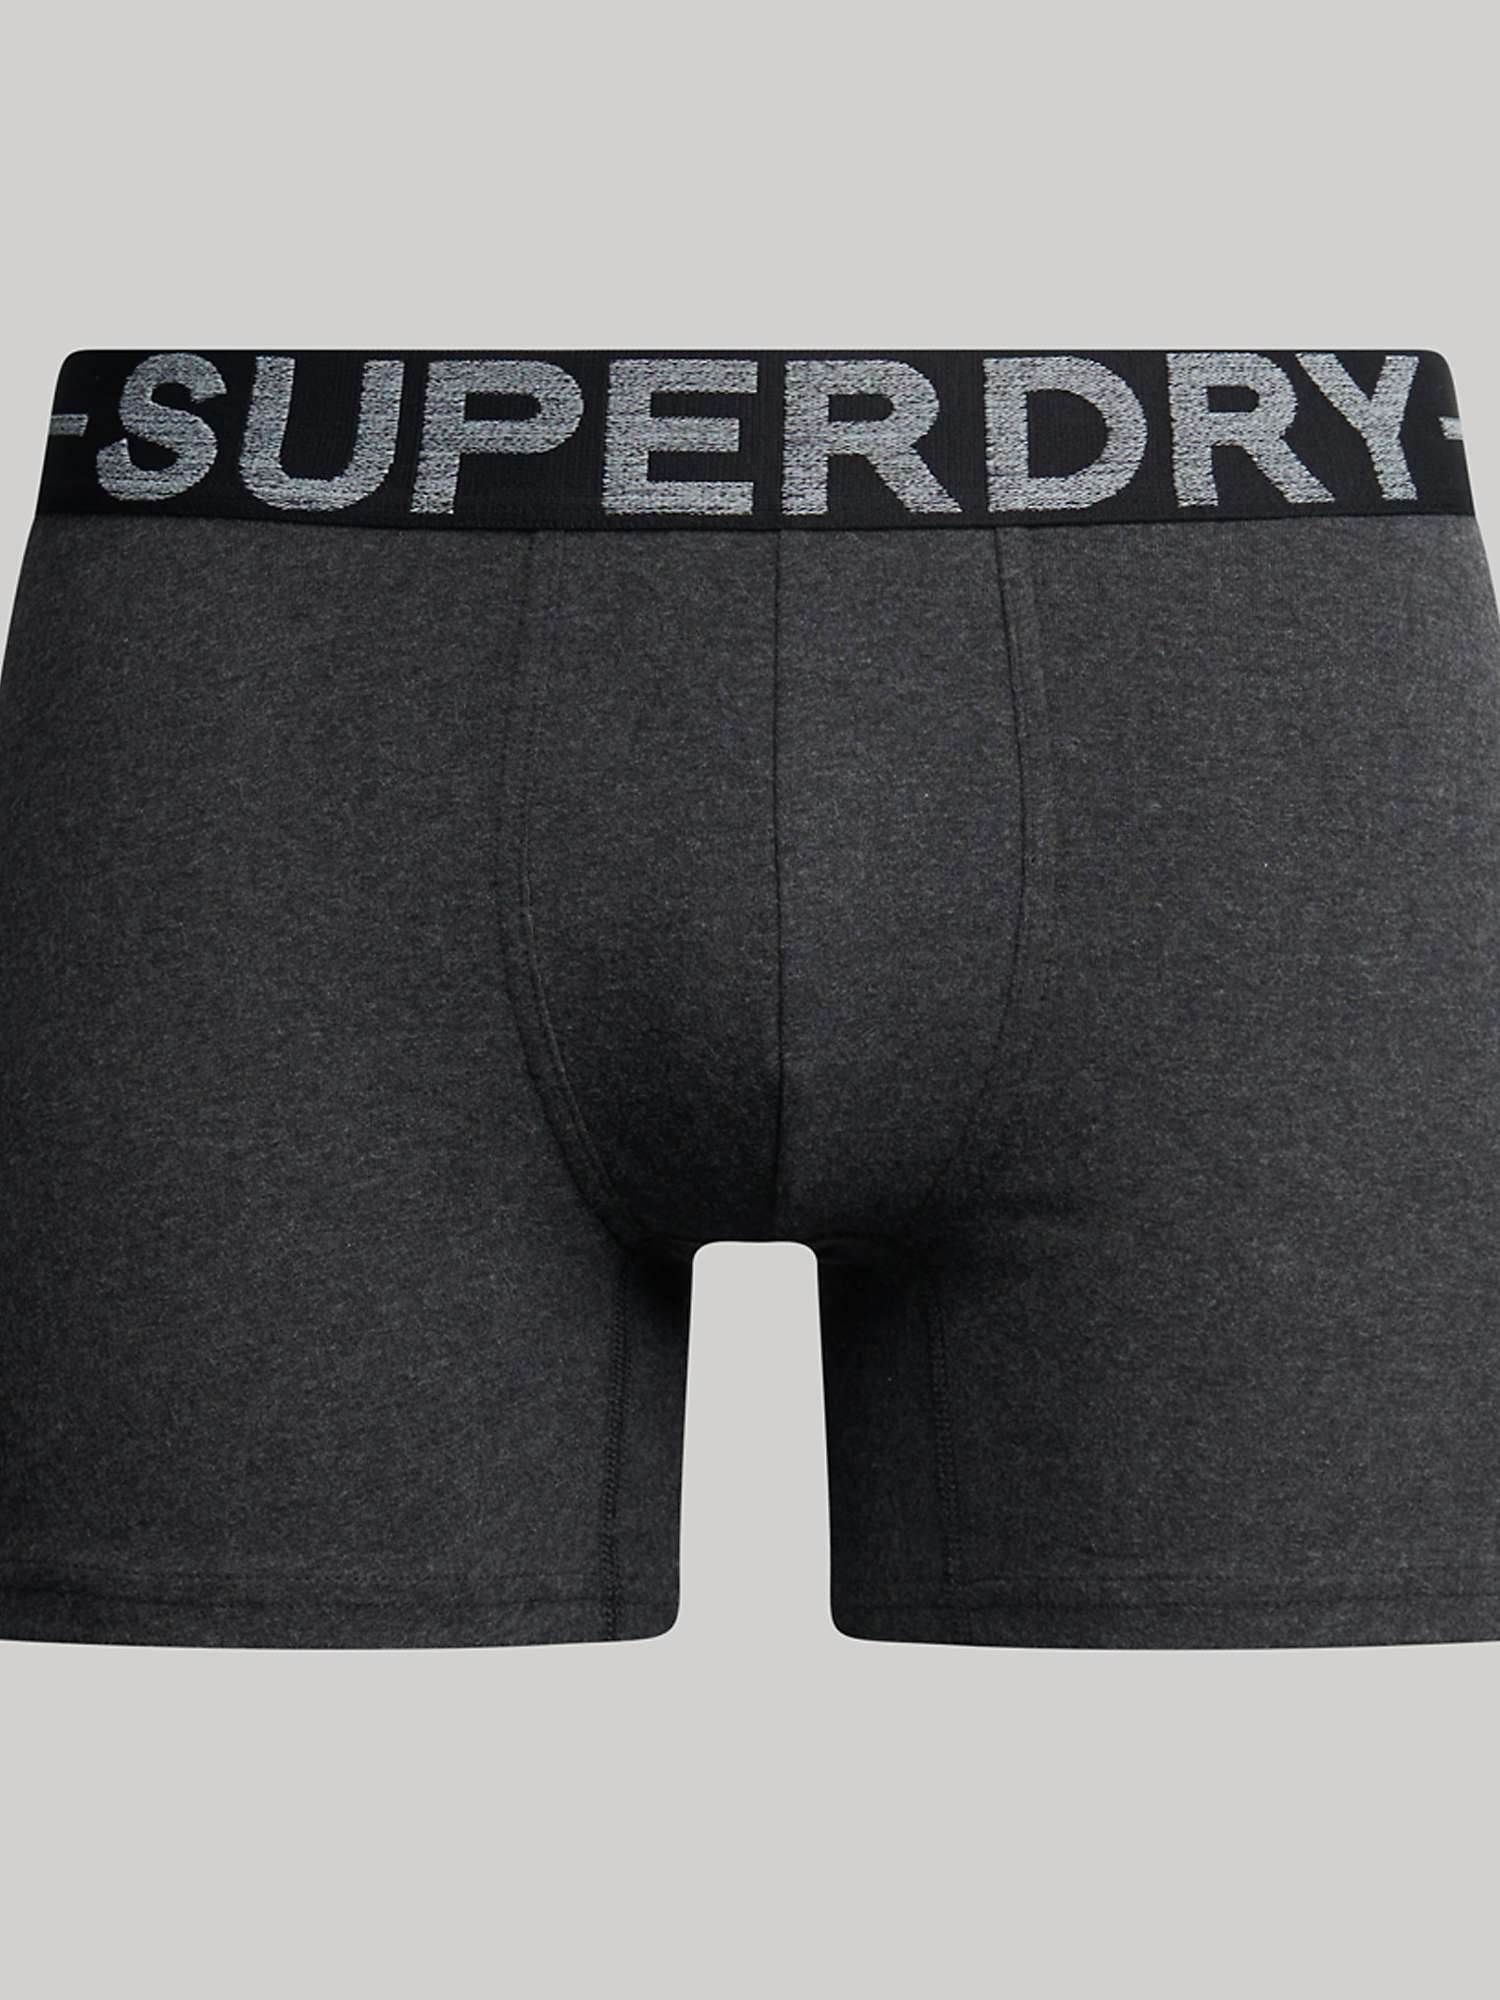 Buy Superdry Organic Cotton Blend Boxers, Pack of 3 Online at johnlewis.com